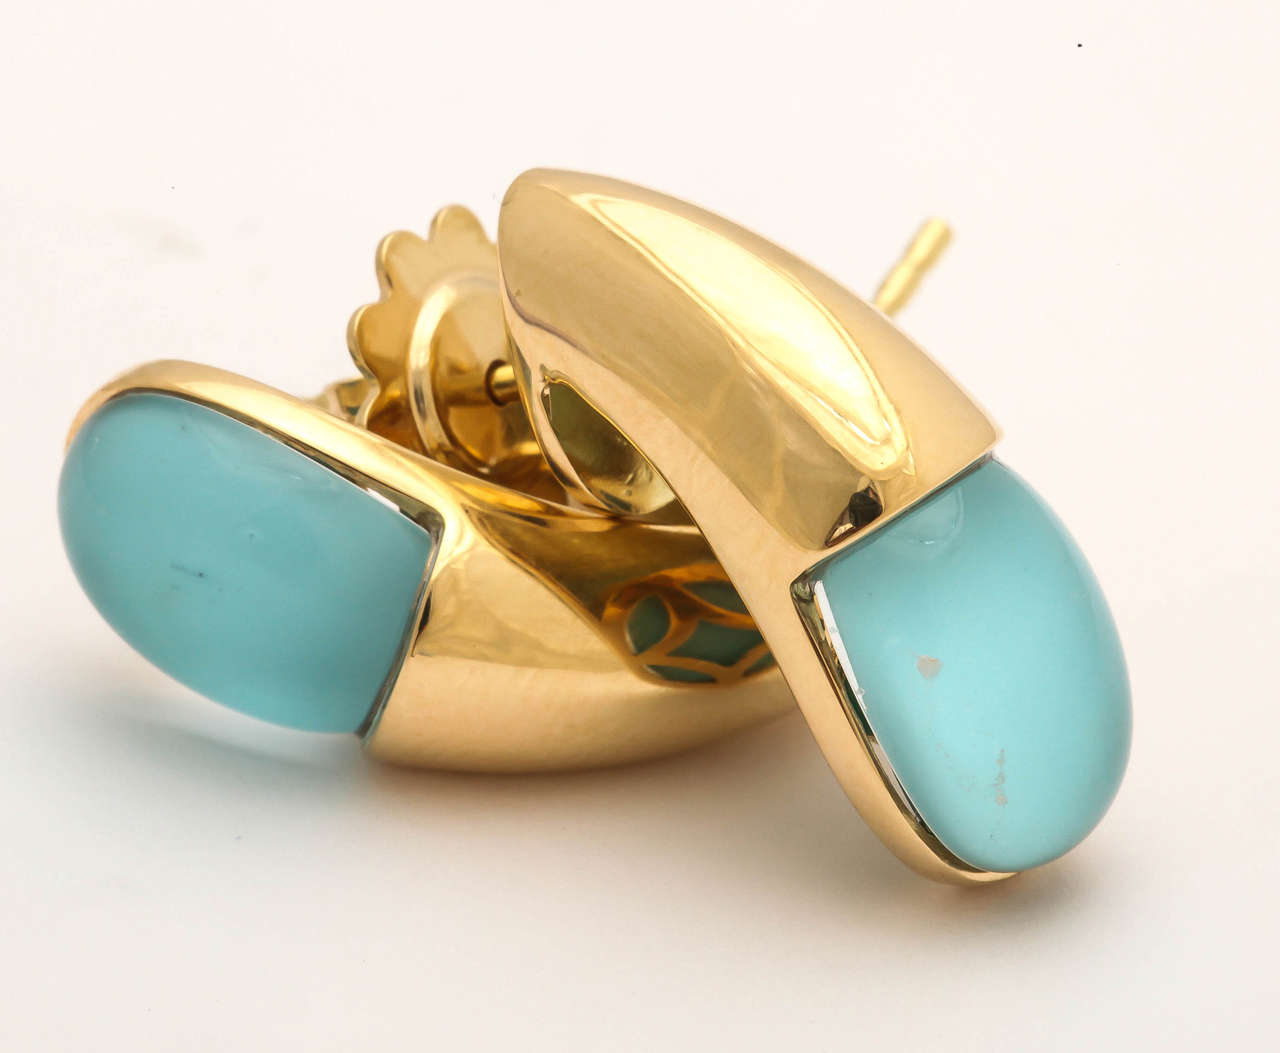 Faraone Mennella Gocce Cabochon Turquoise Gold Earrings In New Condition For Sale In New York, NY